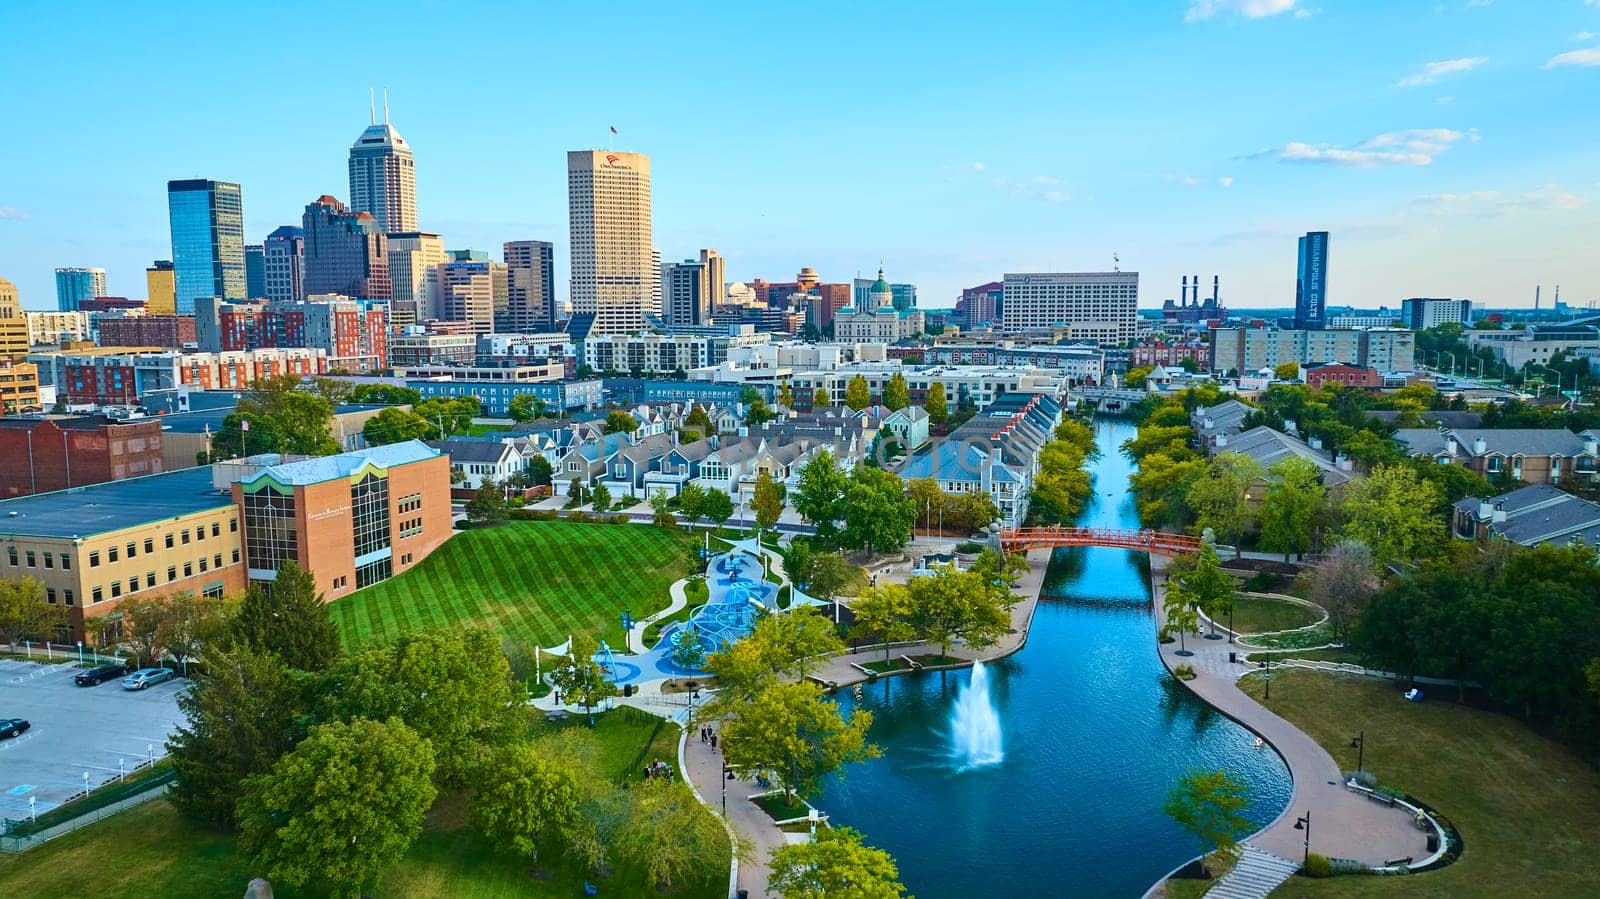 Aerial View of Vibrant Indianapolis Cityscape with Serene Park and Waterway at Golden Hour